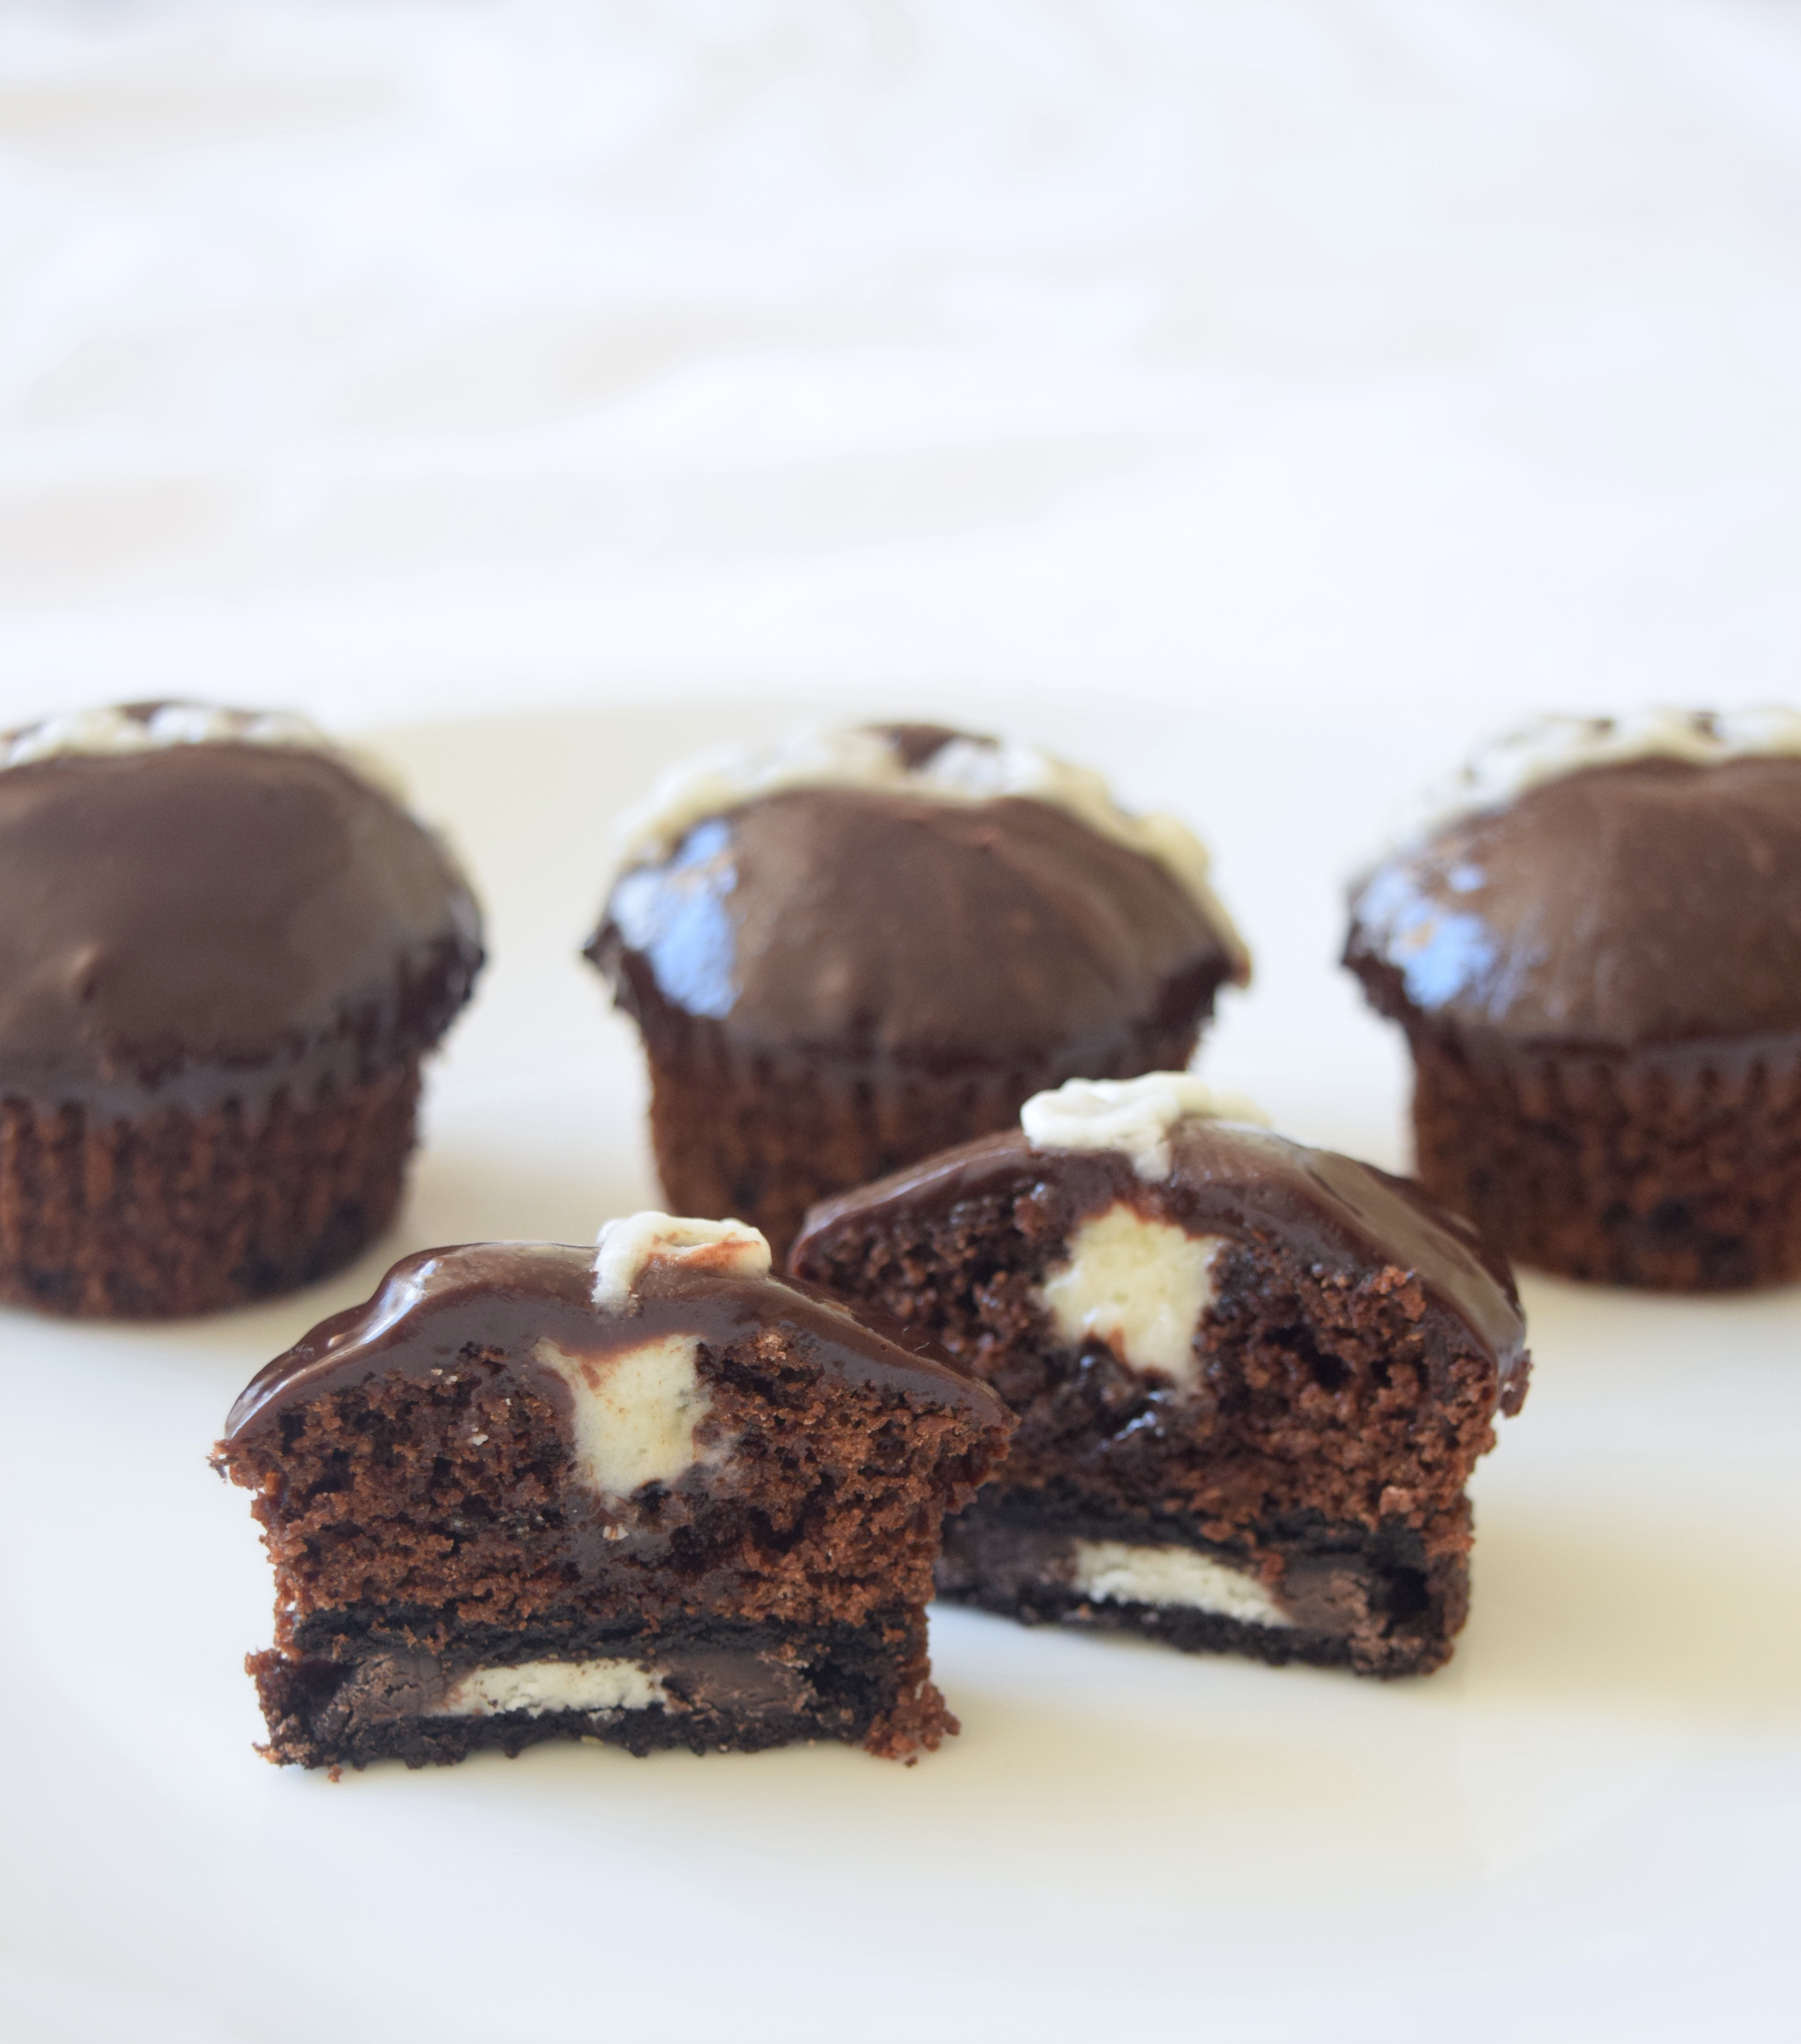 Filled Cupcakes Stuffed With Filled OREO Cupcakes Recipe